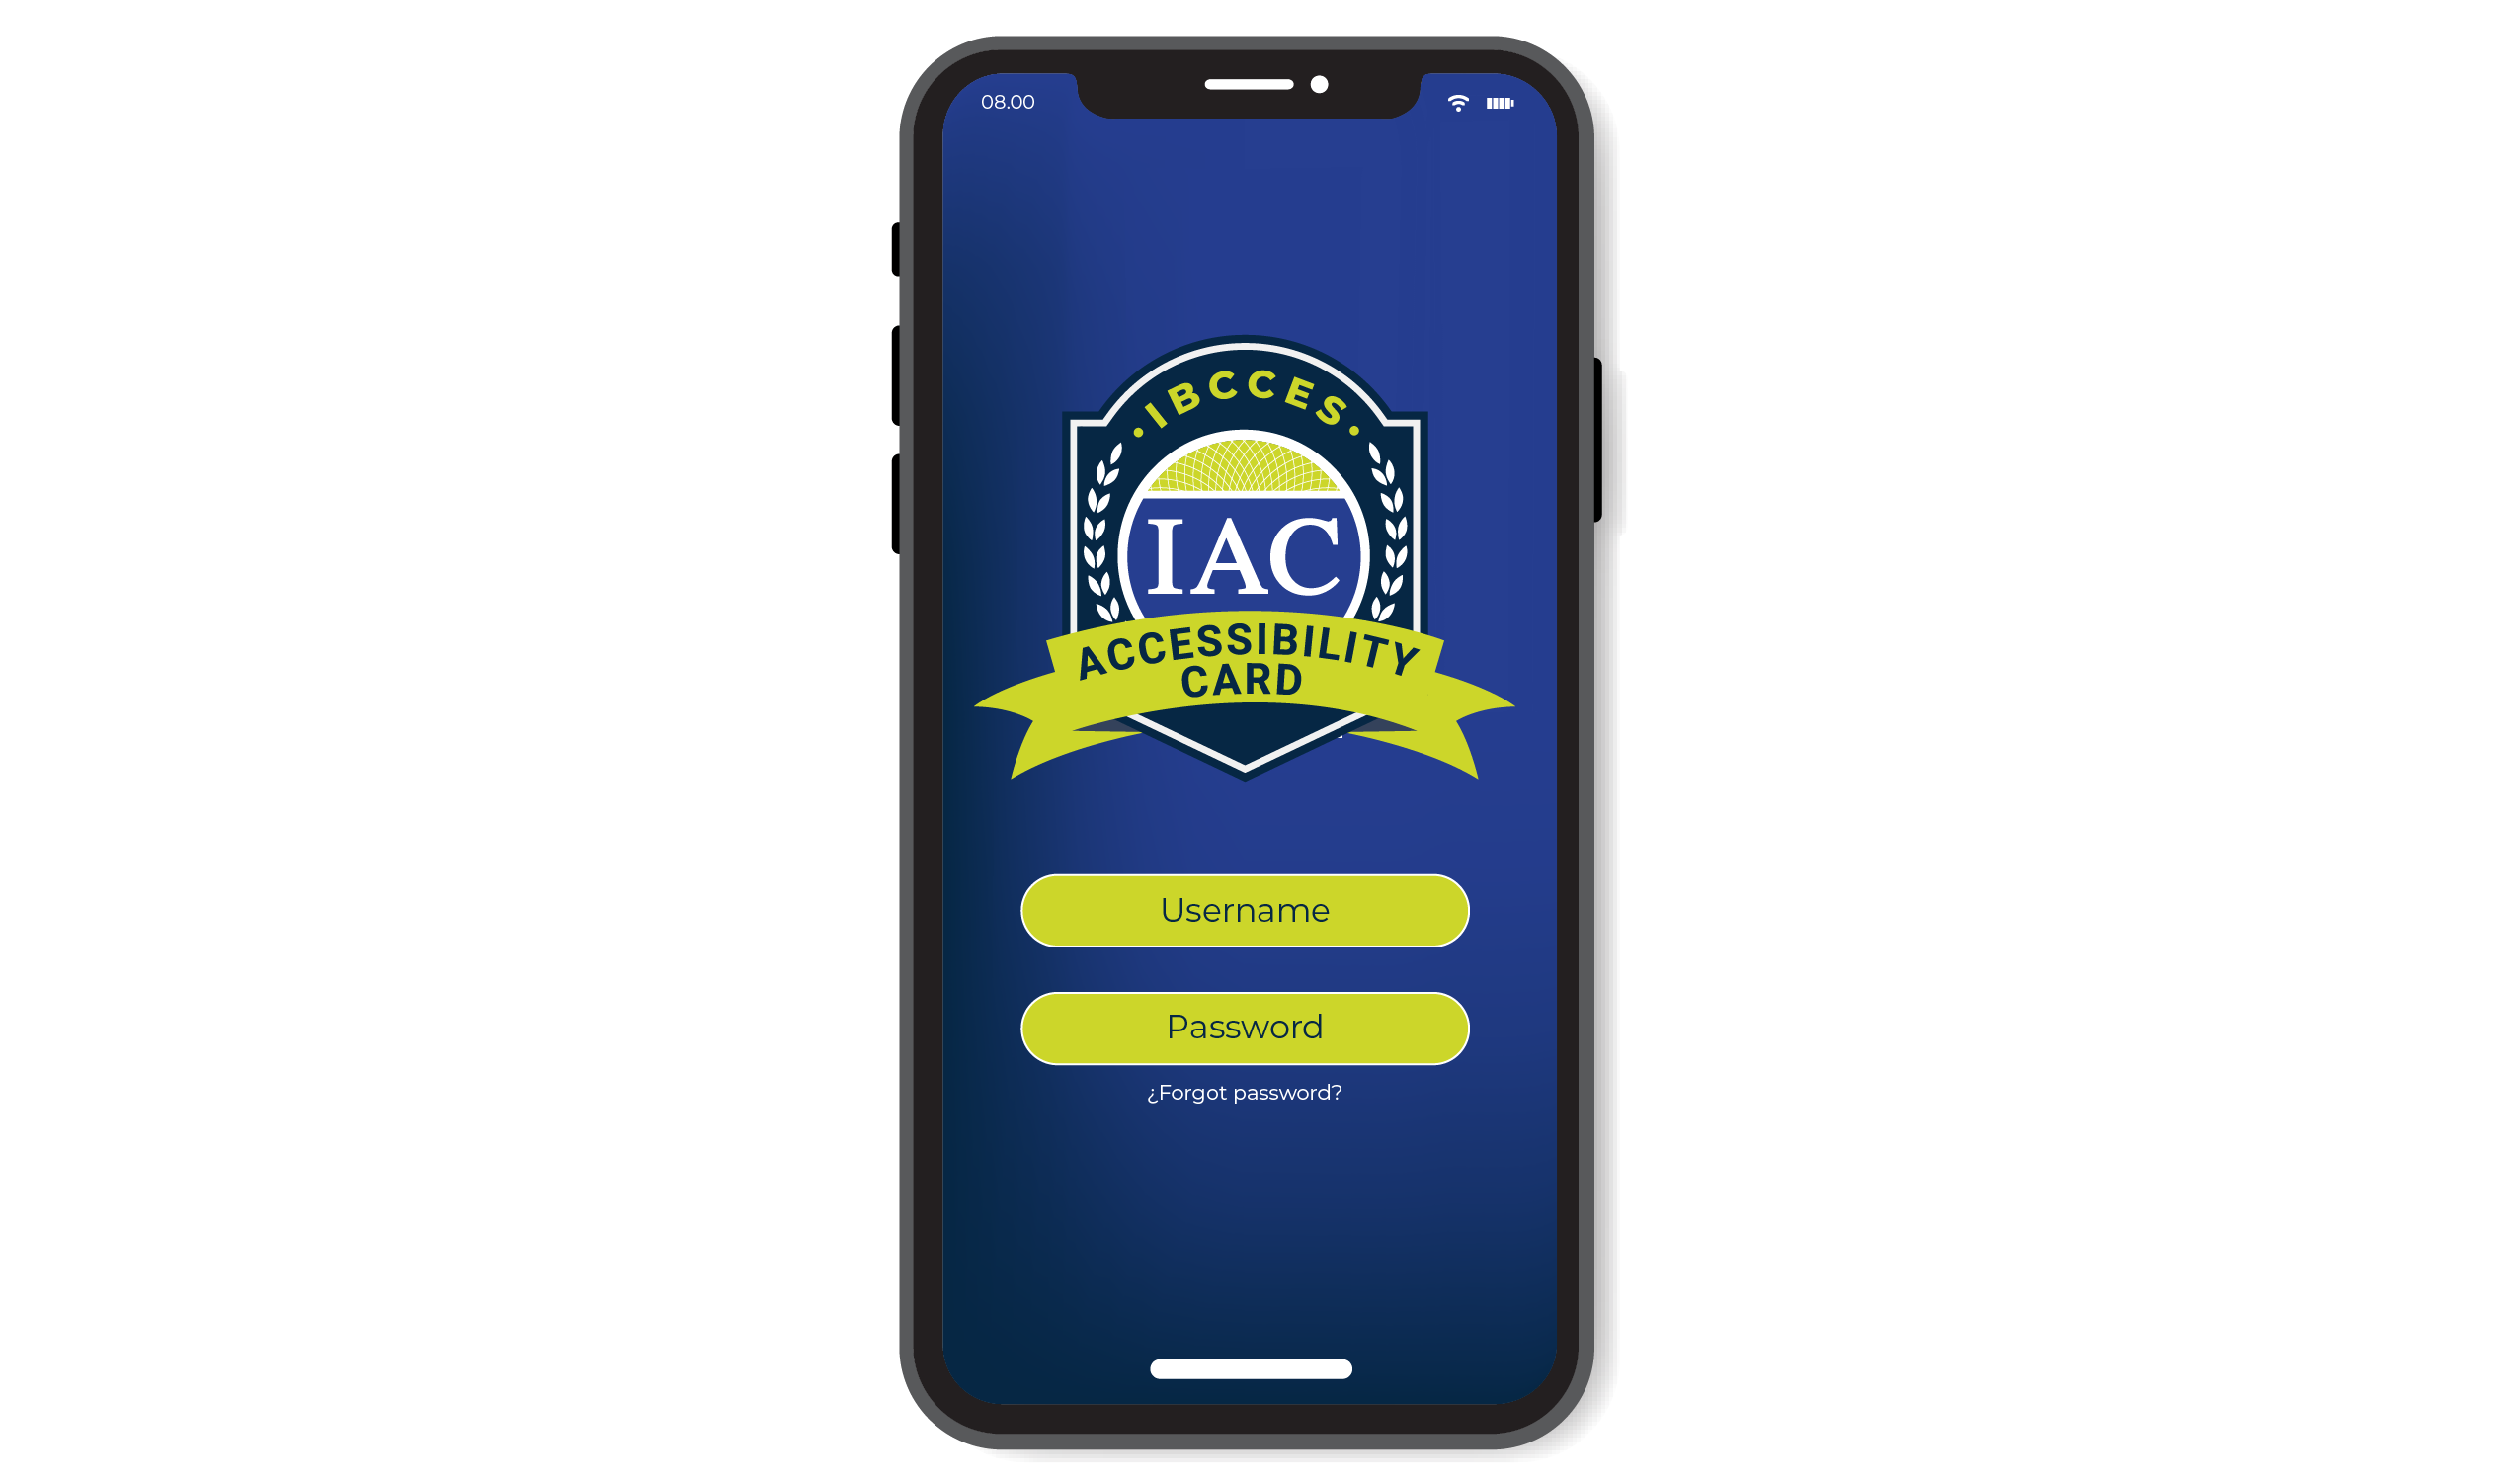 35,000+ Families Enroll in IBCCES’ Accessibility Card Program That Helps Streamline Accommodations at Attractions thumbnail